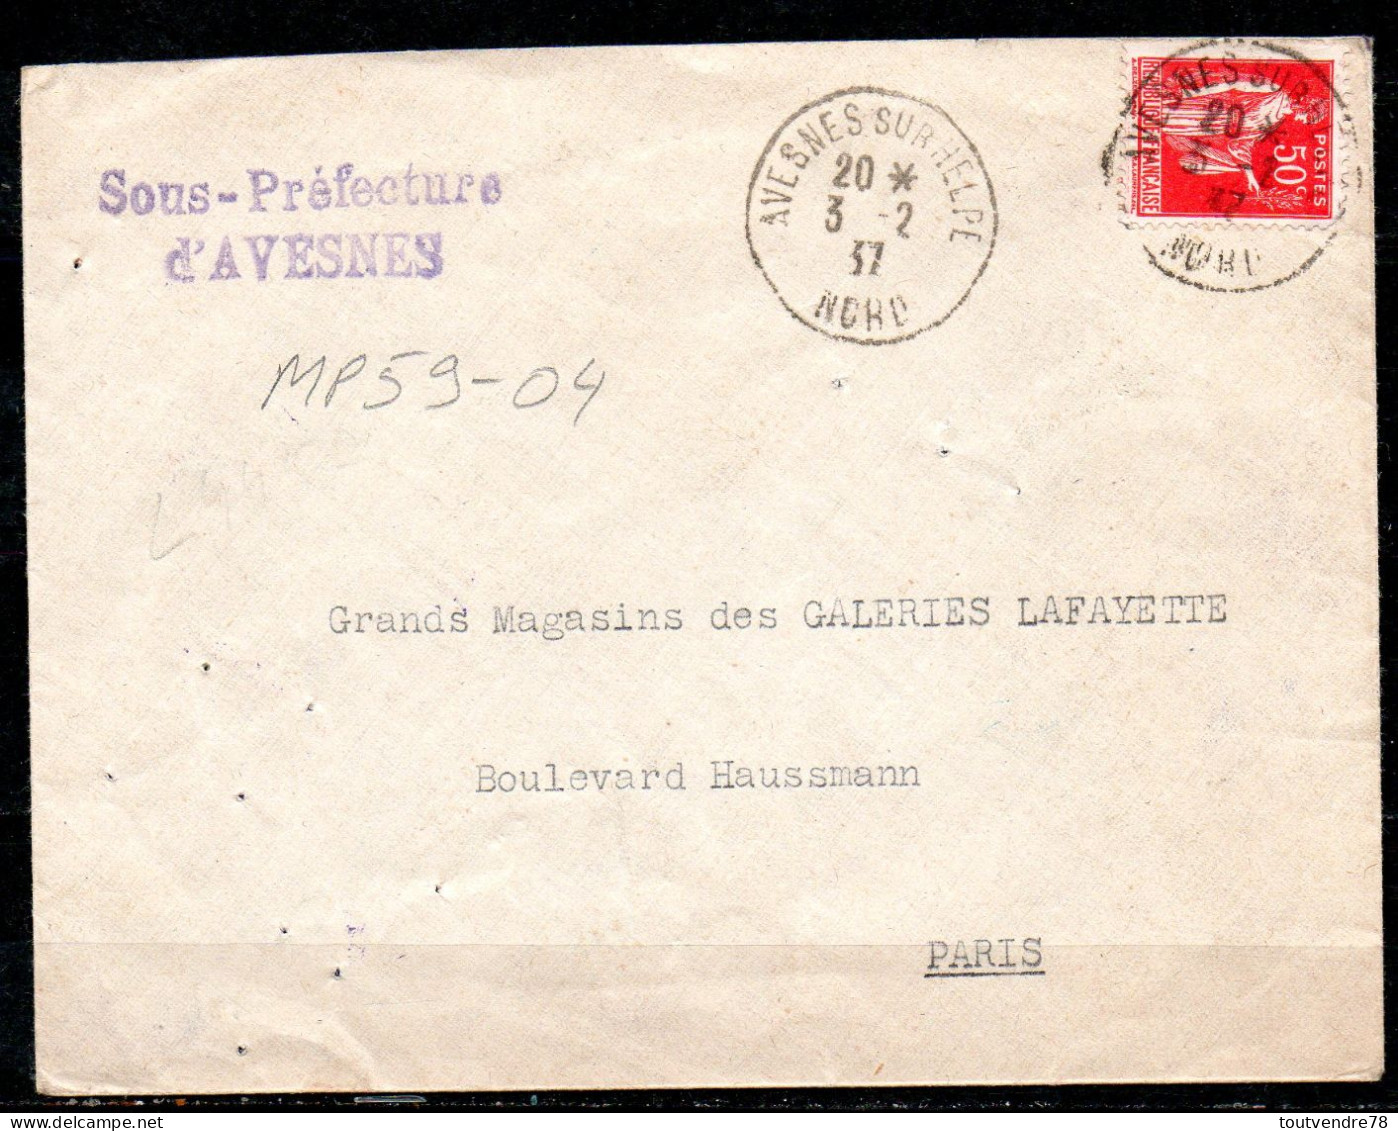 MP59-04 : Dept 59 (Nord) AVESNES SUR HELPE 1937 > Cachet Type A4 - Manual Postmarks